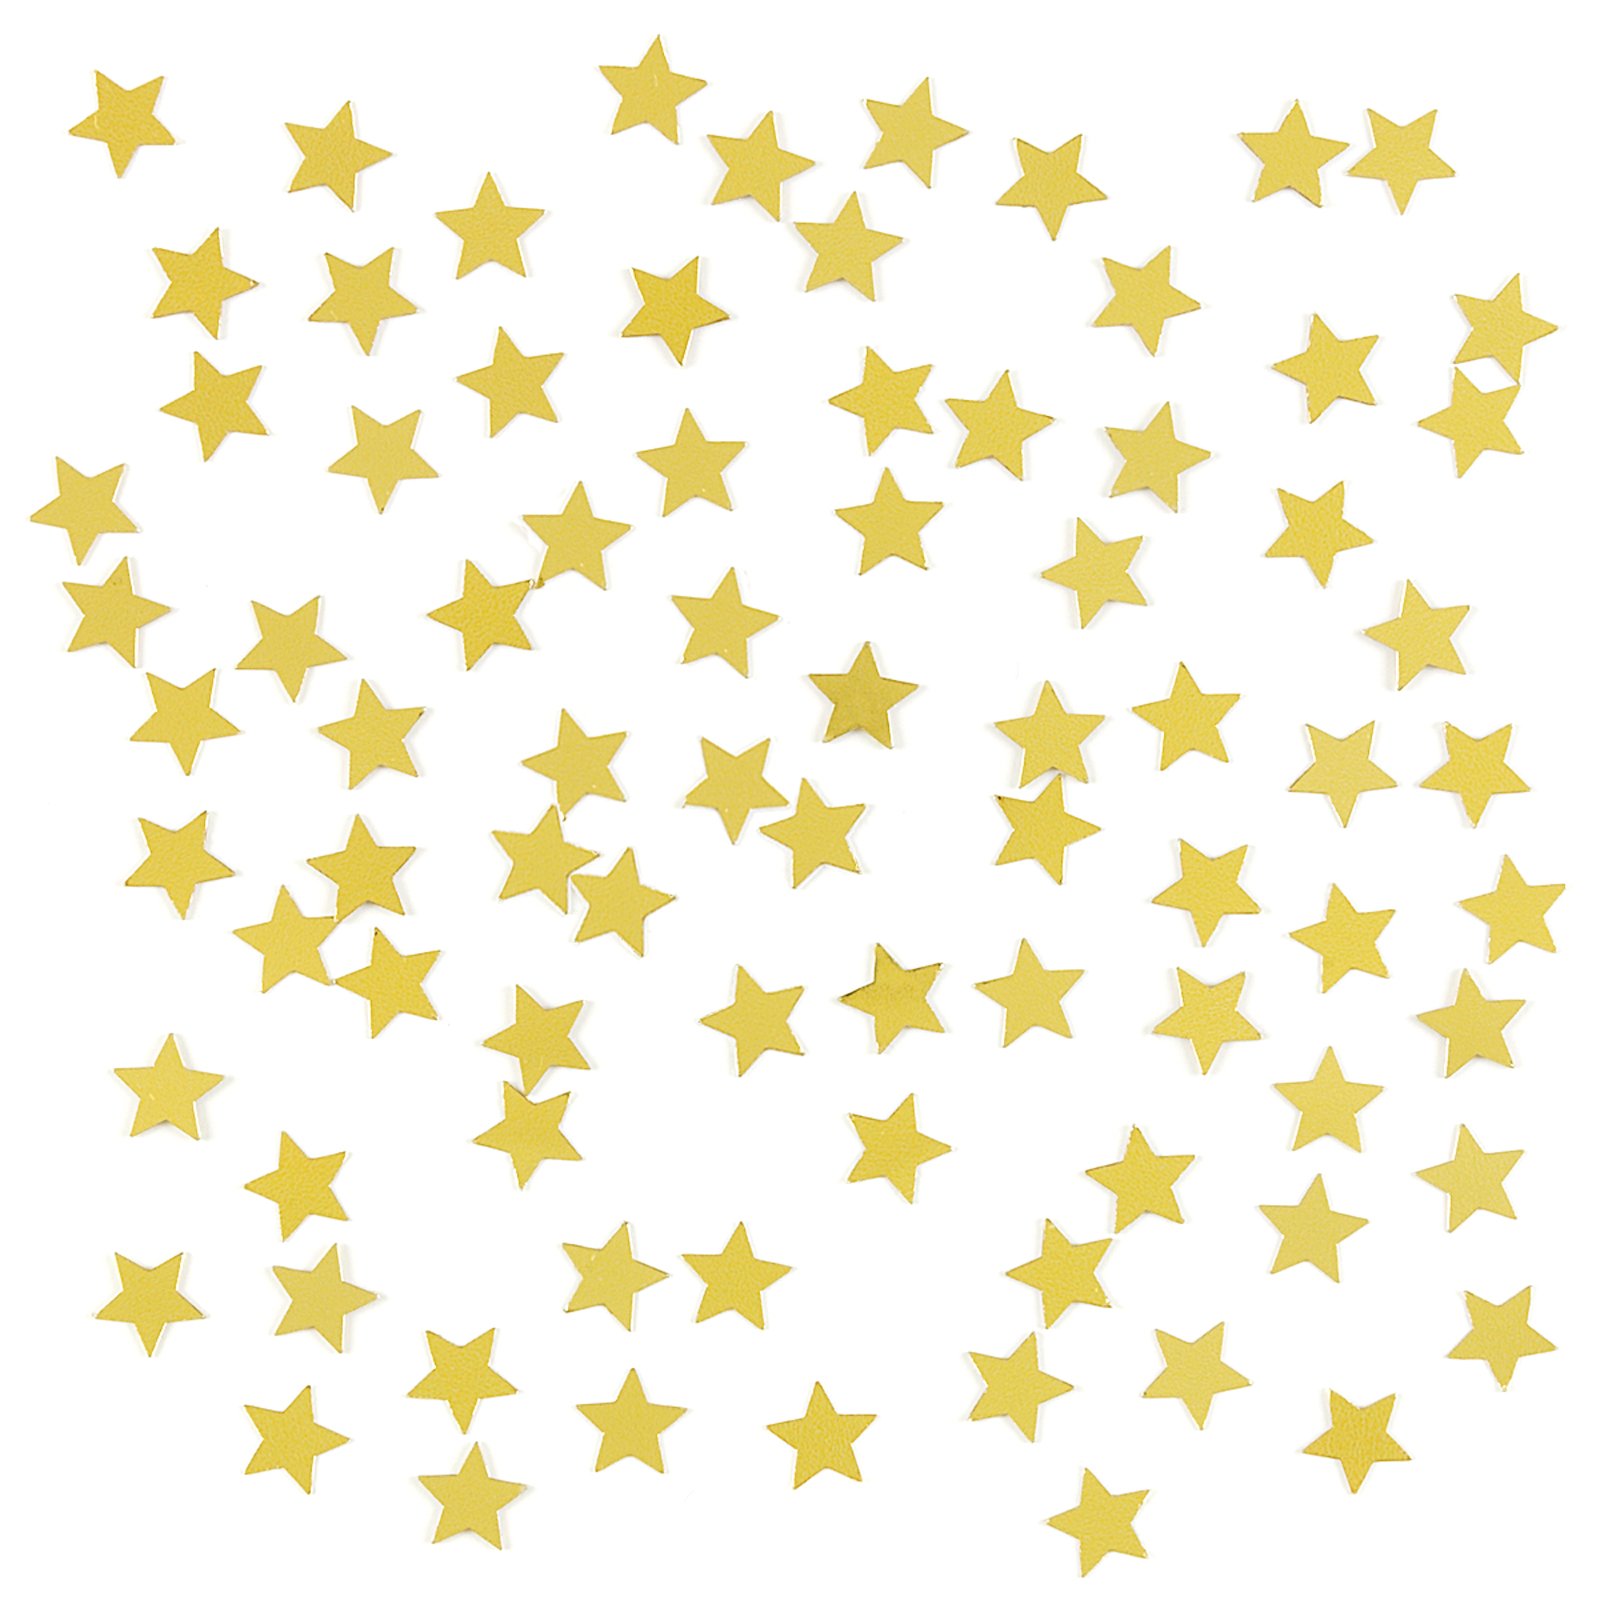 Gold Star Public Domain Stars Gold Curved Clipart